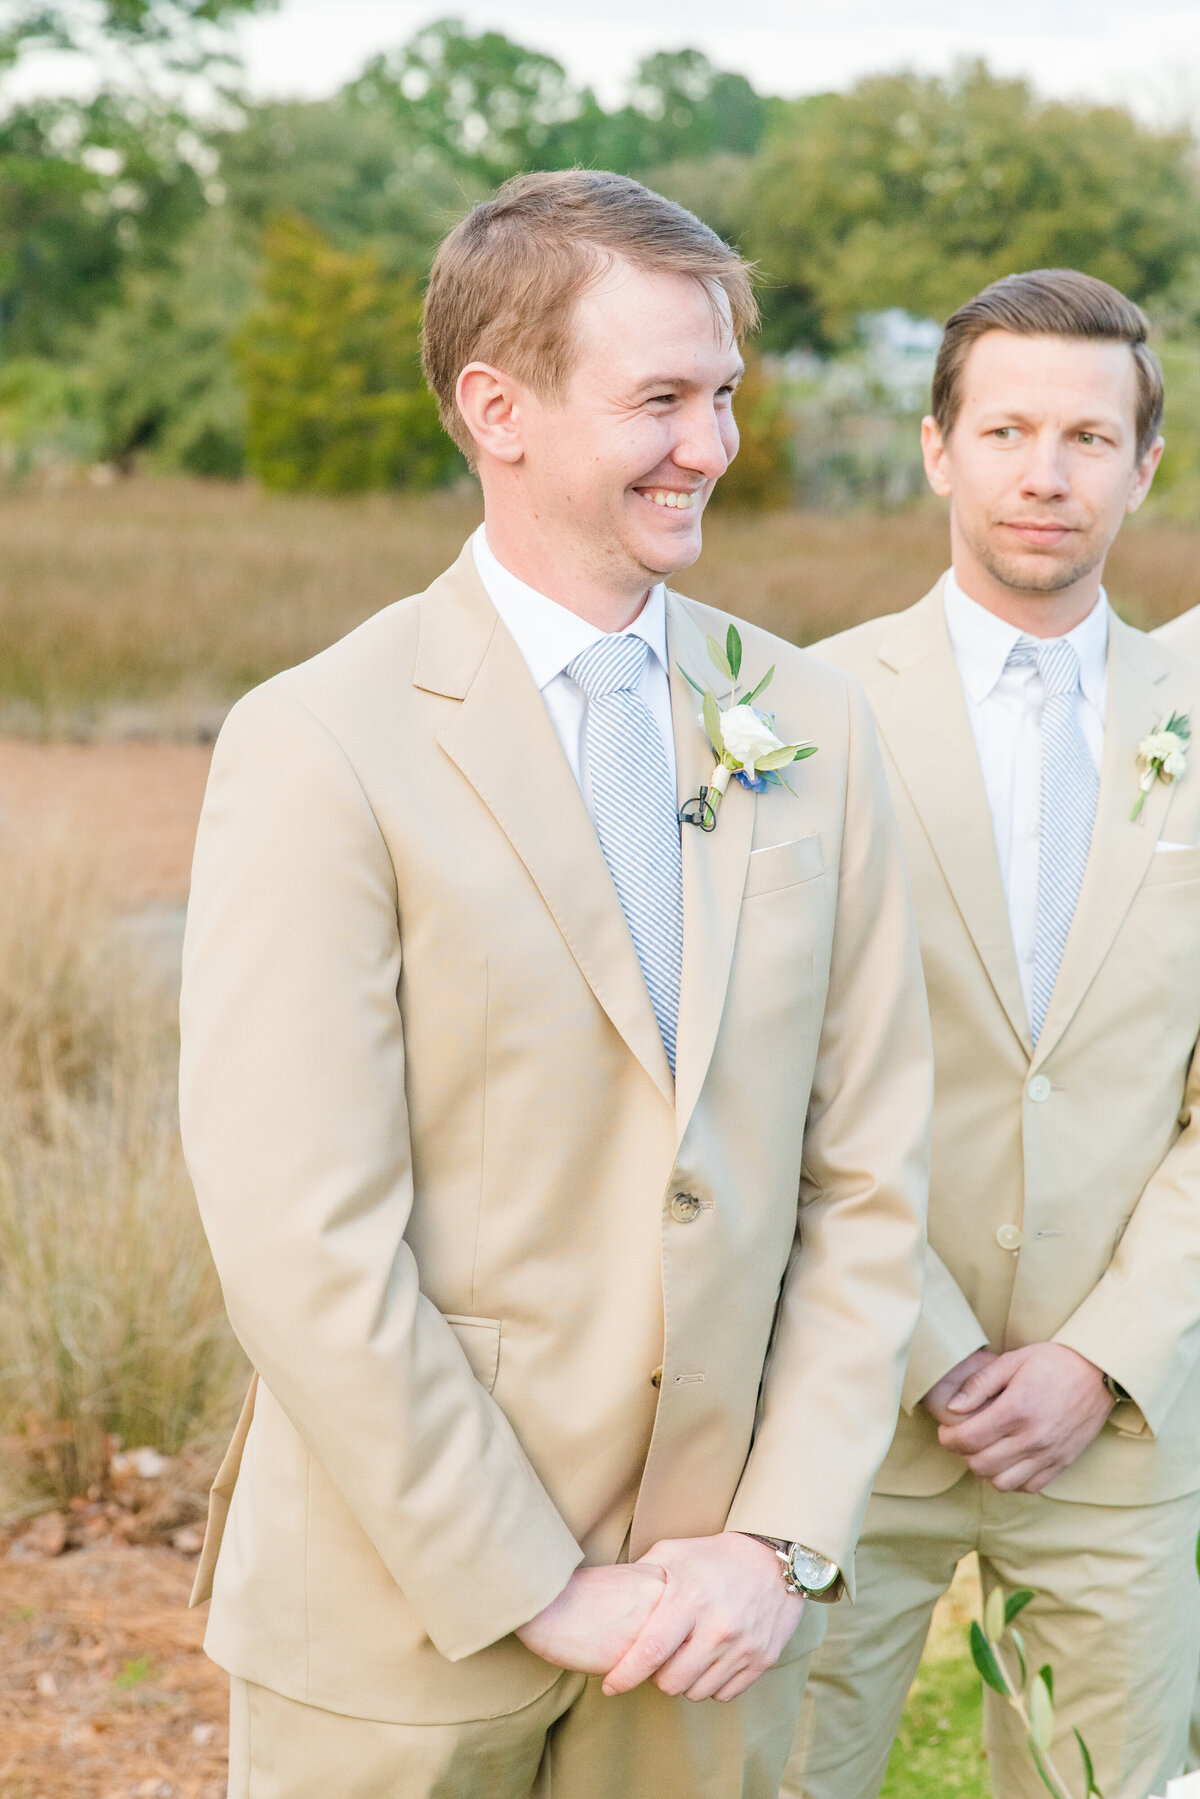 Candid photo of groom at his wedding in Charleston, SC by wedding photographer Dana Cubbage.